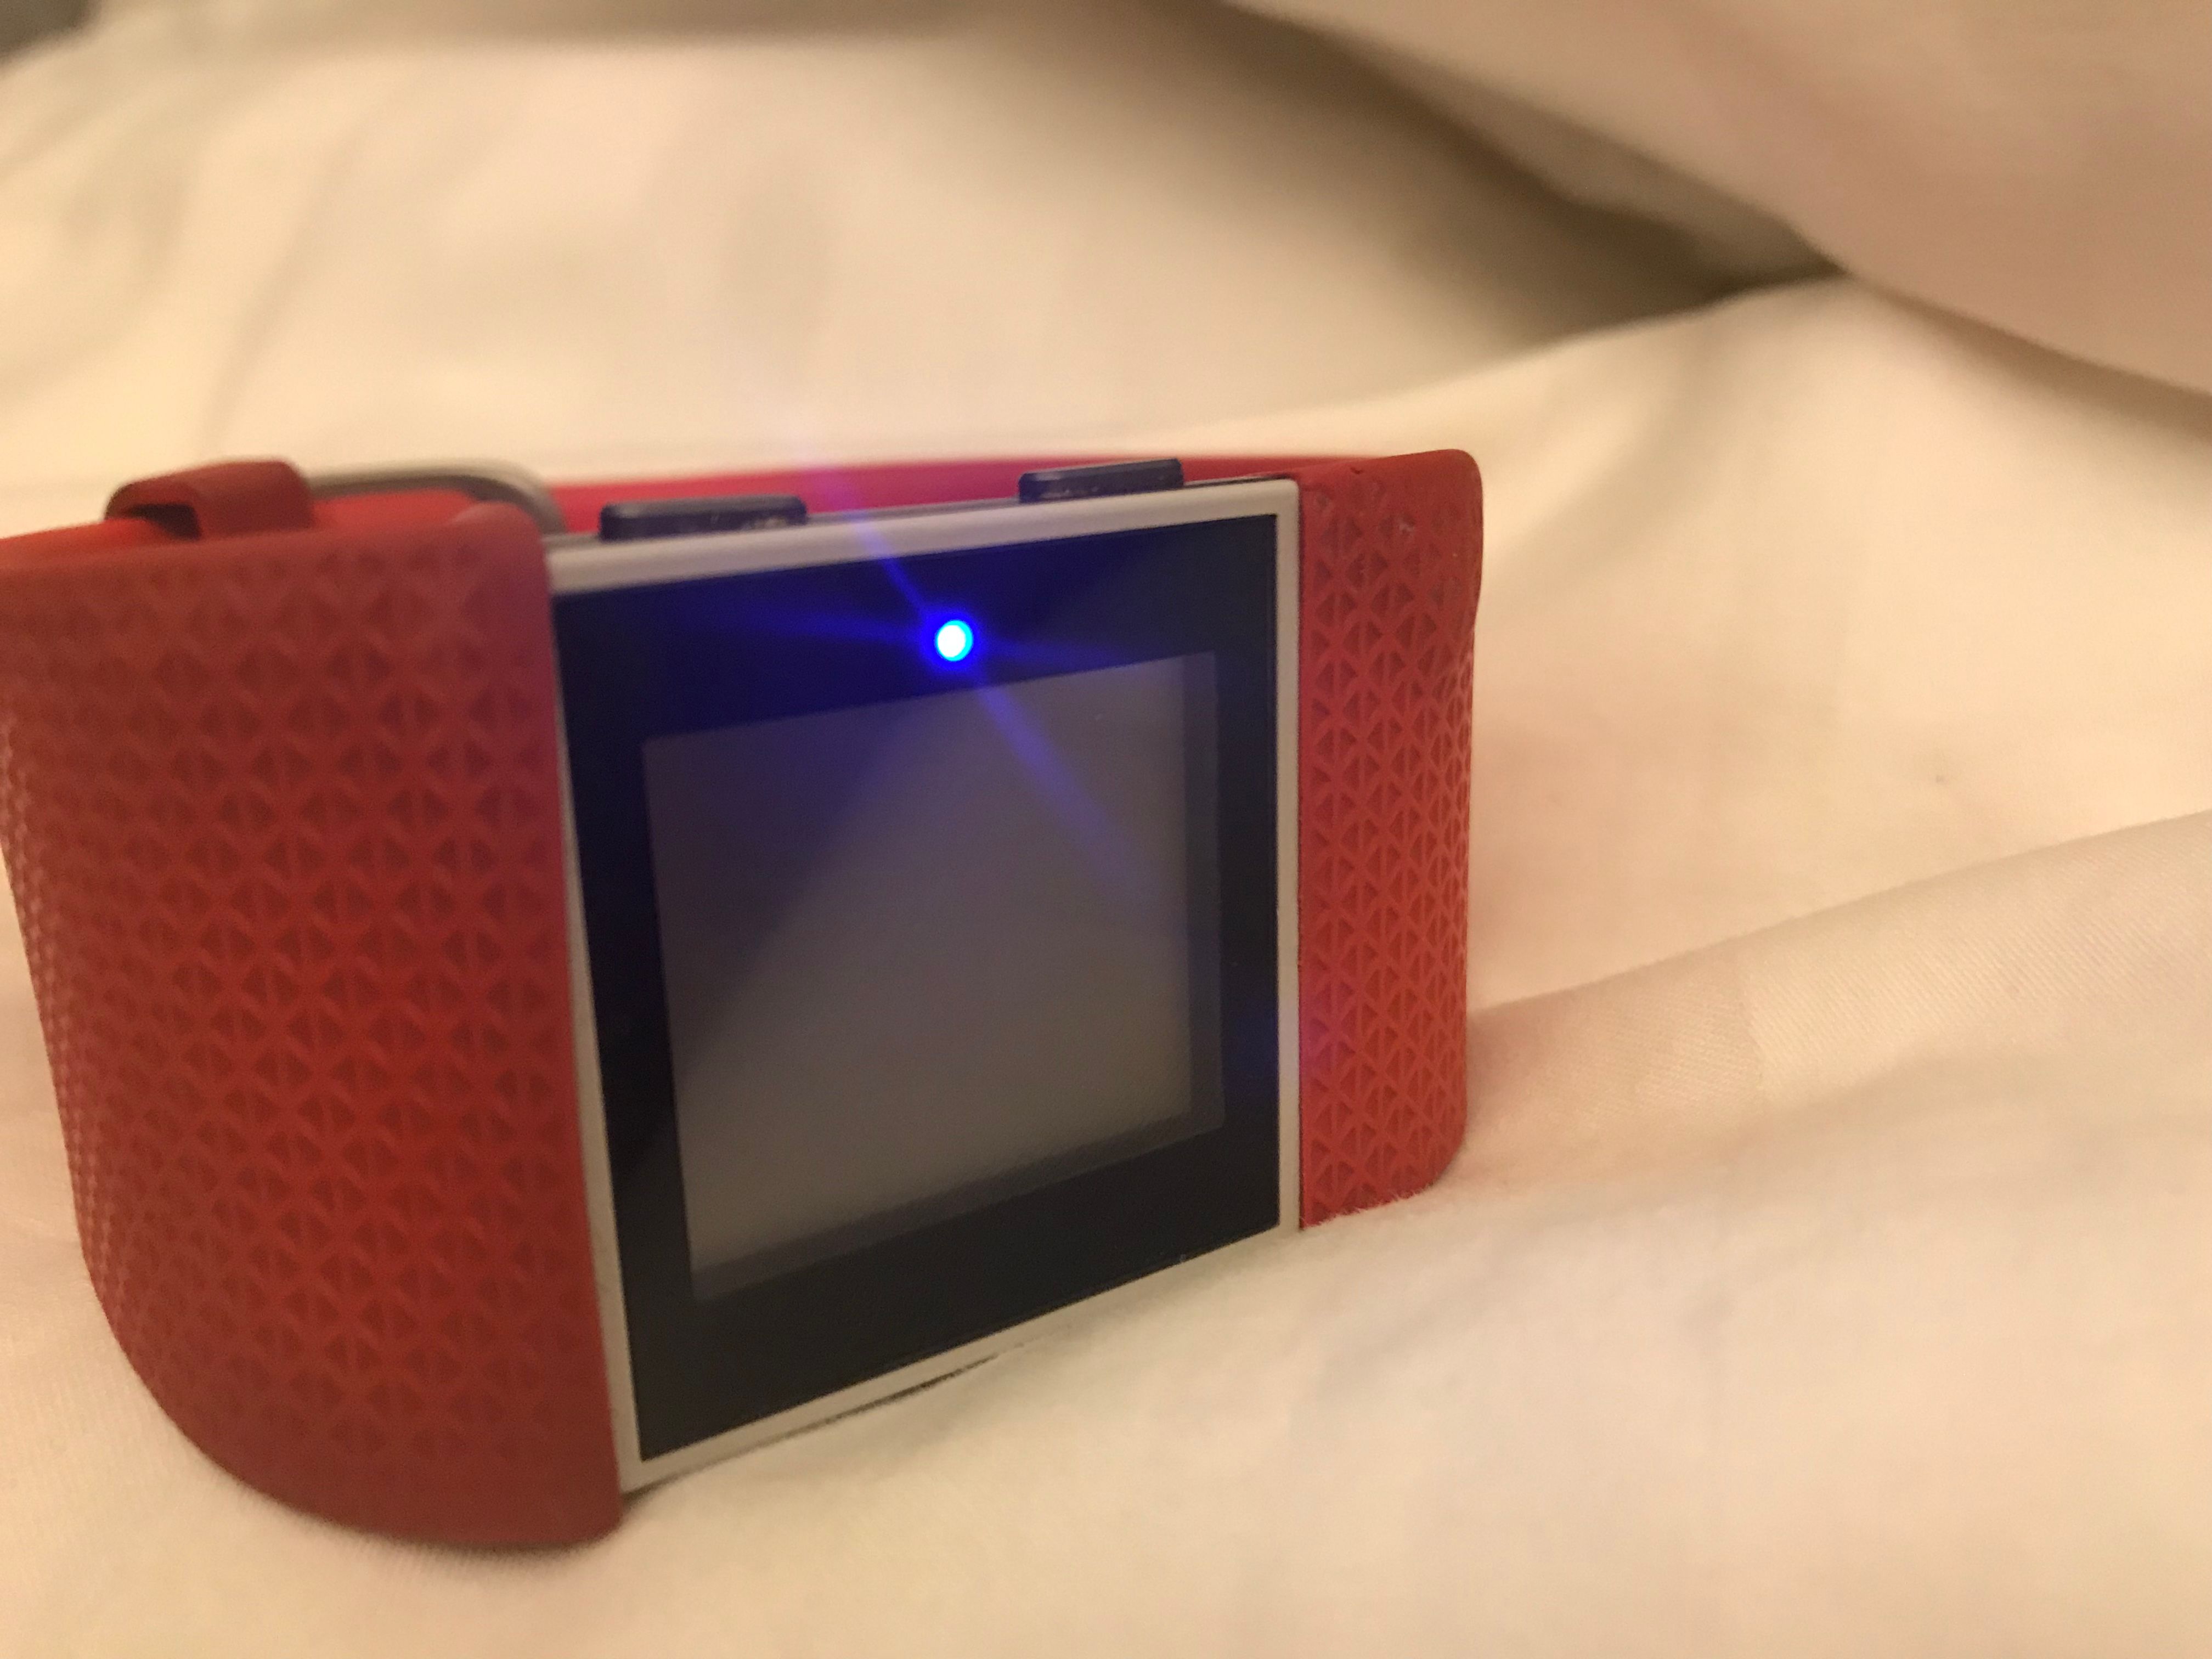 fitbit surge red light